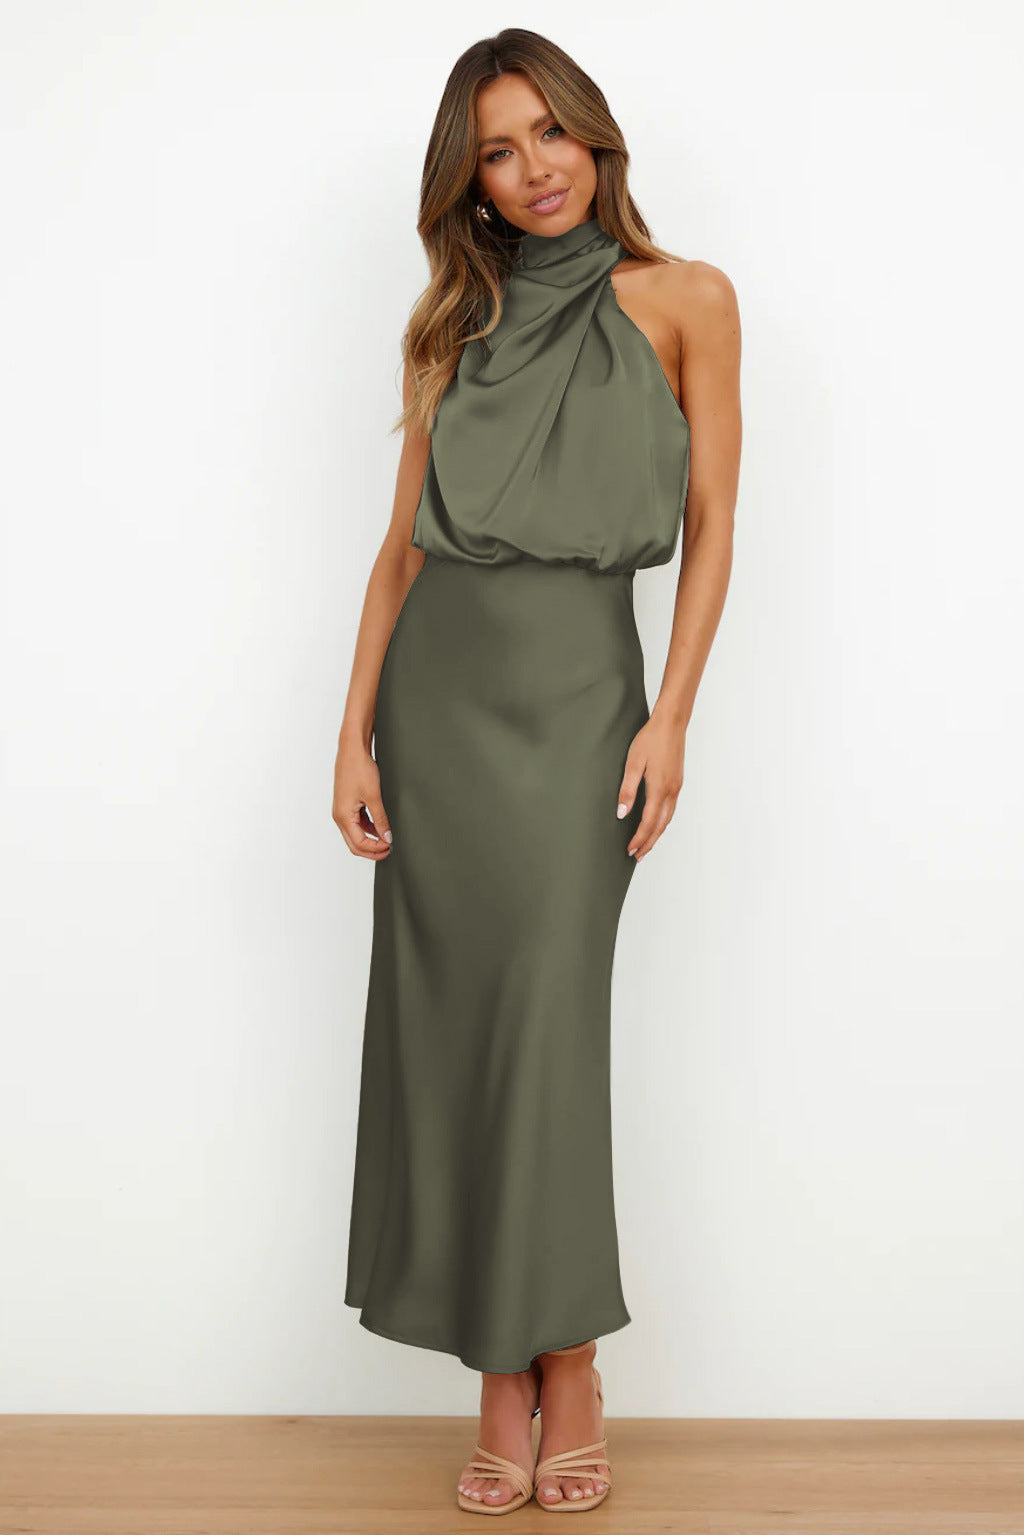 Sexy Halter Women Evening Party Dresses-Dresses-Army Green-S-Free Shipping at meselling99